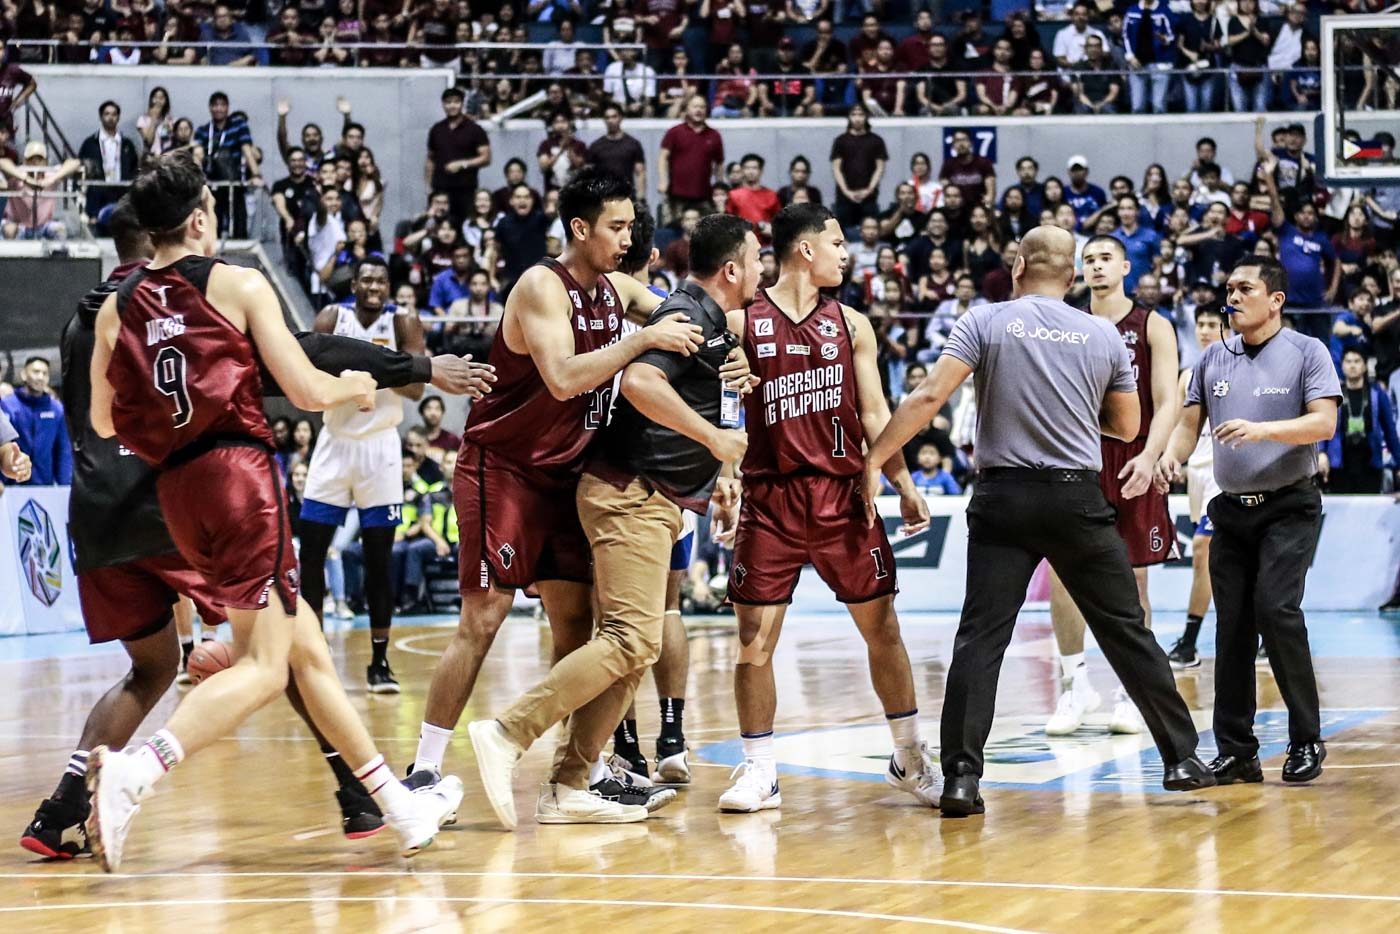 THROWN OUT. UP coach Bo Perasol loses his cool and gets ejected at the 6:23 mark of the 3rd quarter as he confronts a referee for an alleged series of non-calls.Photo by Michael Gatpandan/Rappler  